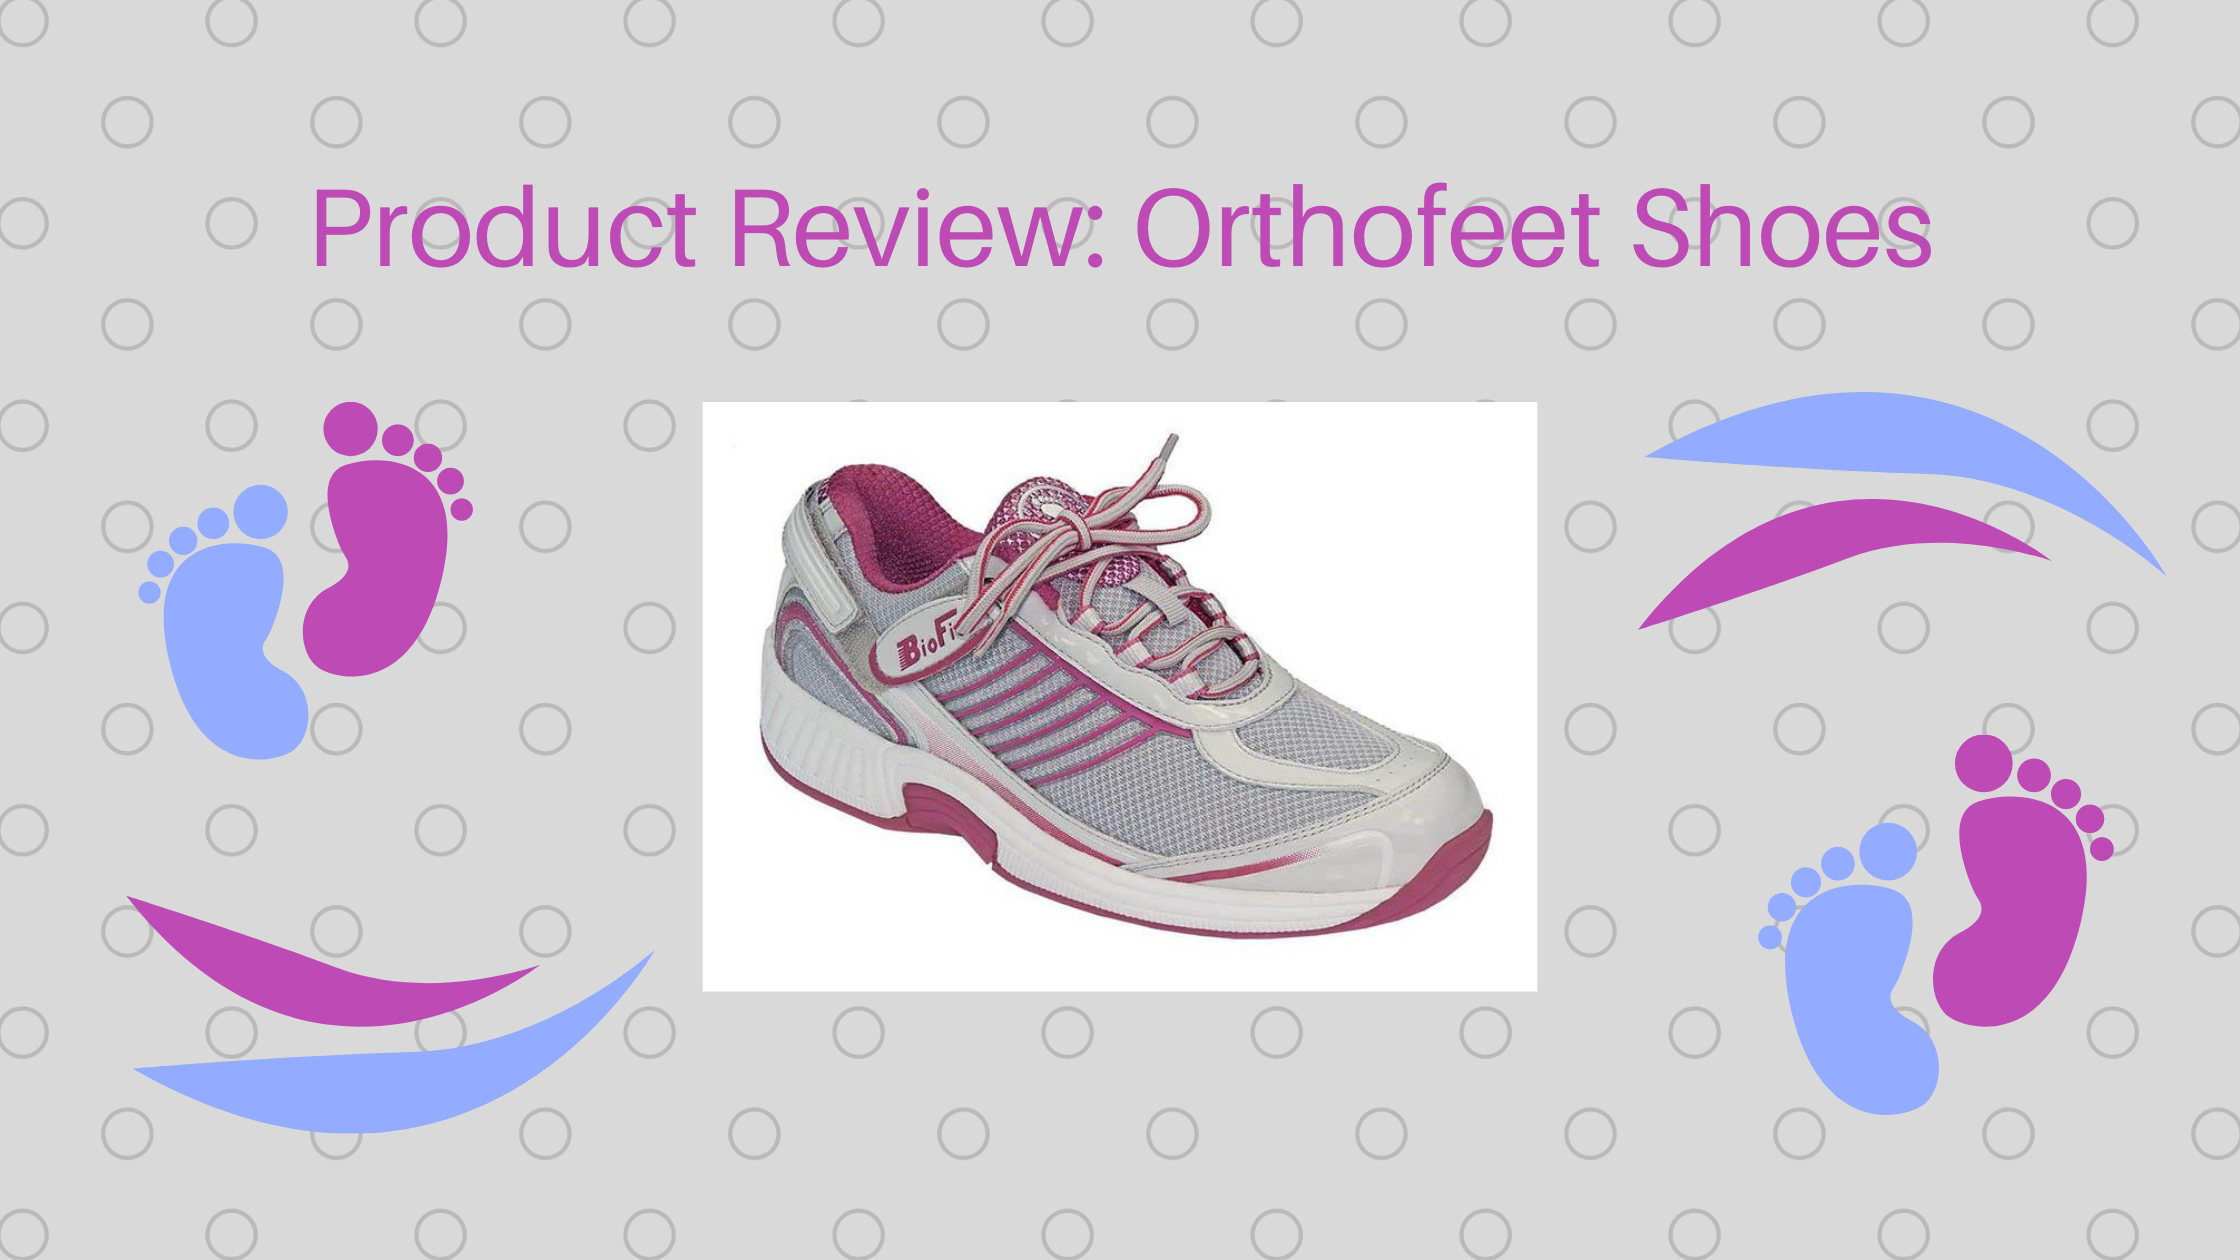 Product Review - Orthofeet Shoes